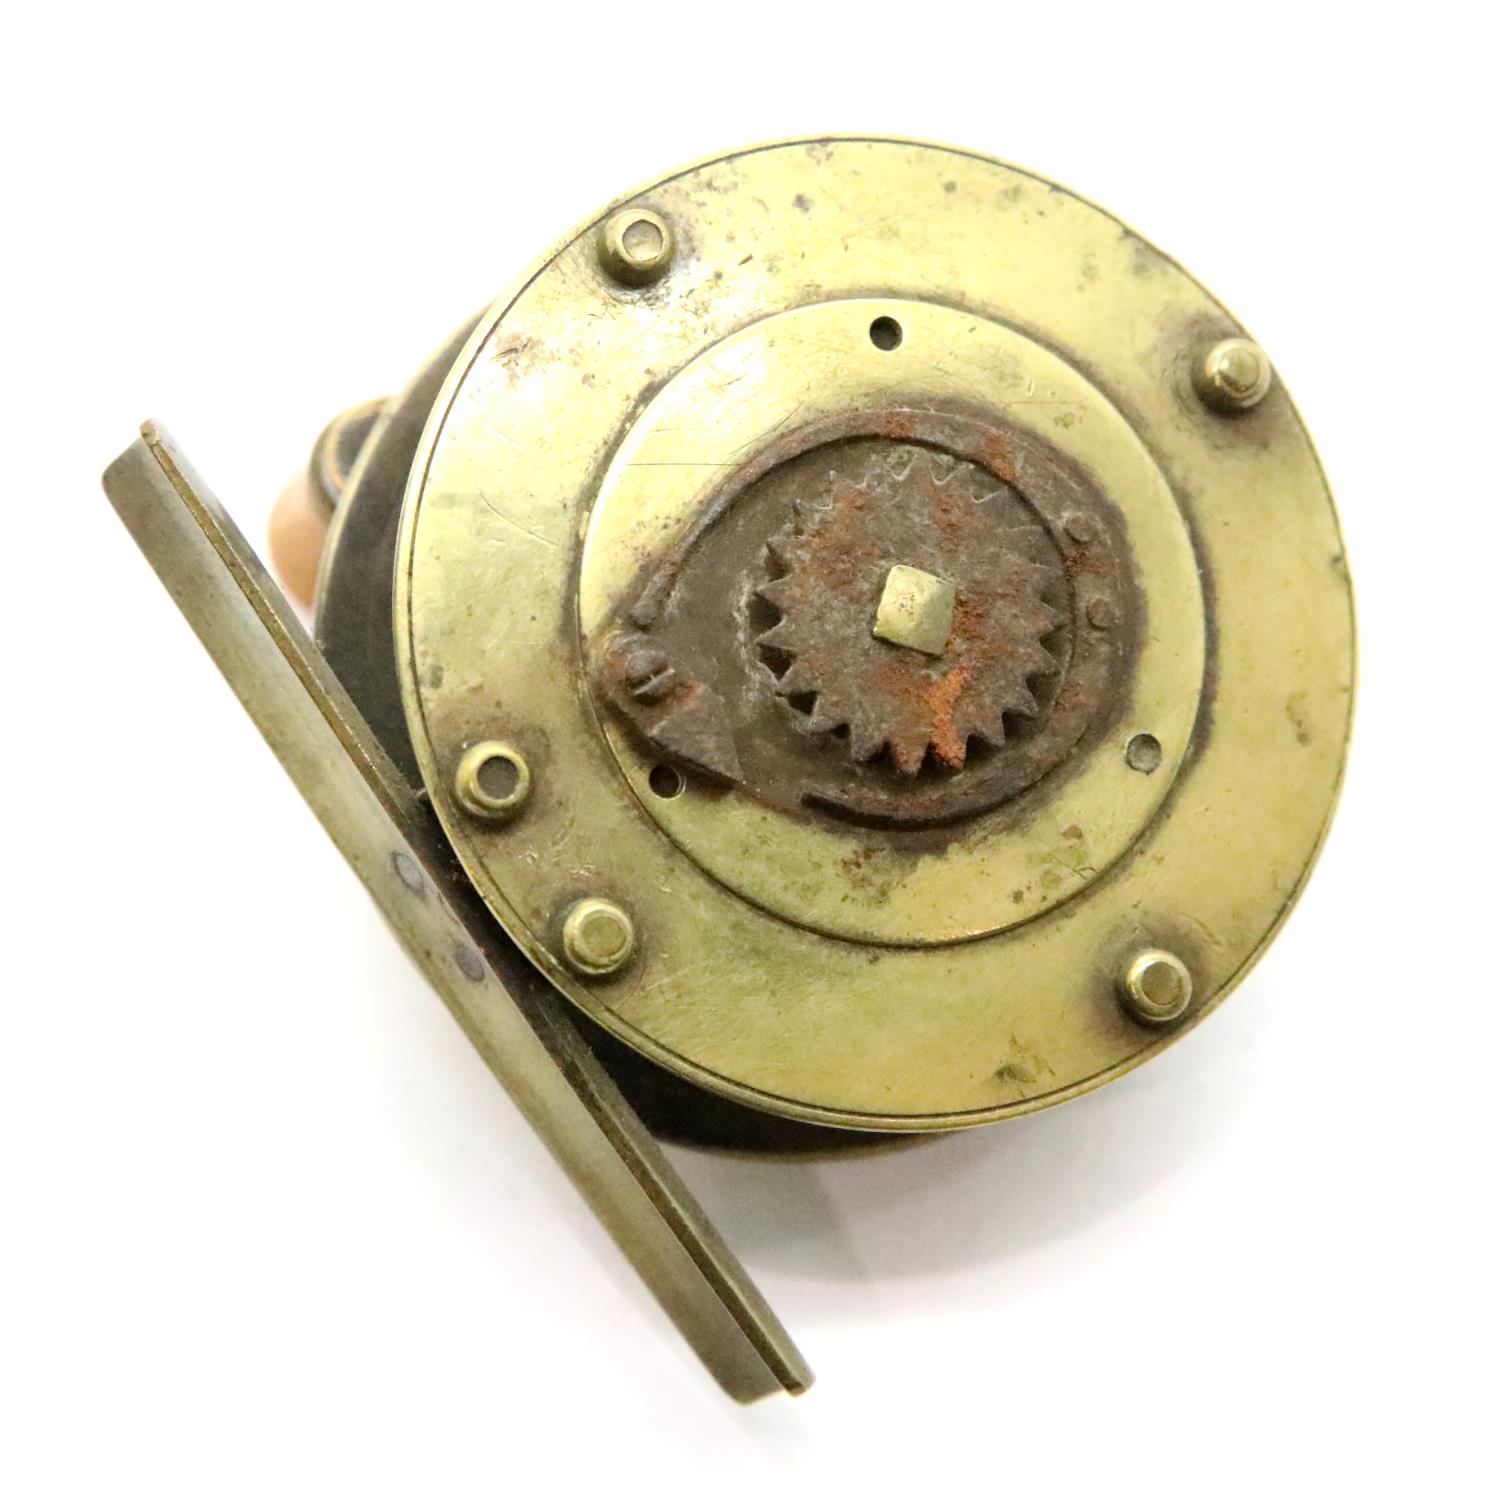 Antique brass fishing reel by Chas Parlour maker 191 Strand, London. P&P Group 2 (£18+VAT for the - Image 2 of 2